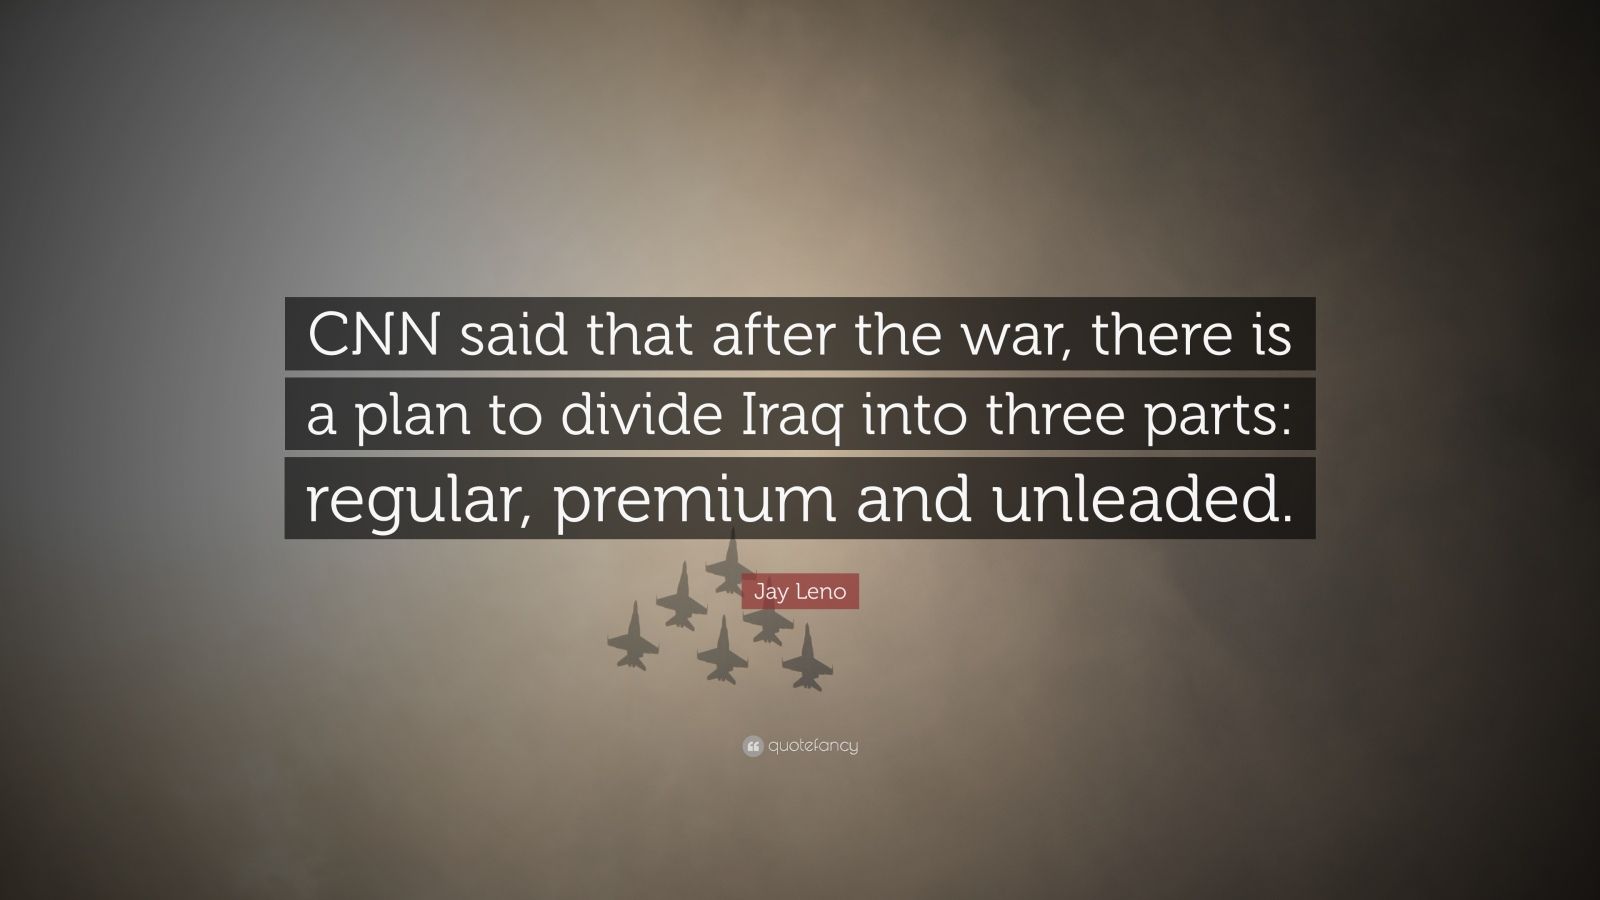 Jay Leno Quote “cnn Said That After The War There Is A Plan To Divide Iraq Into Three Parts